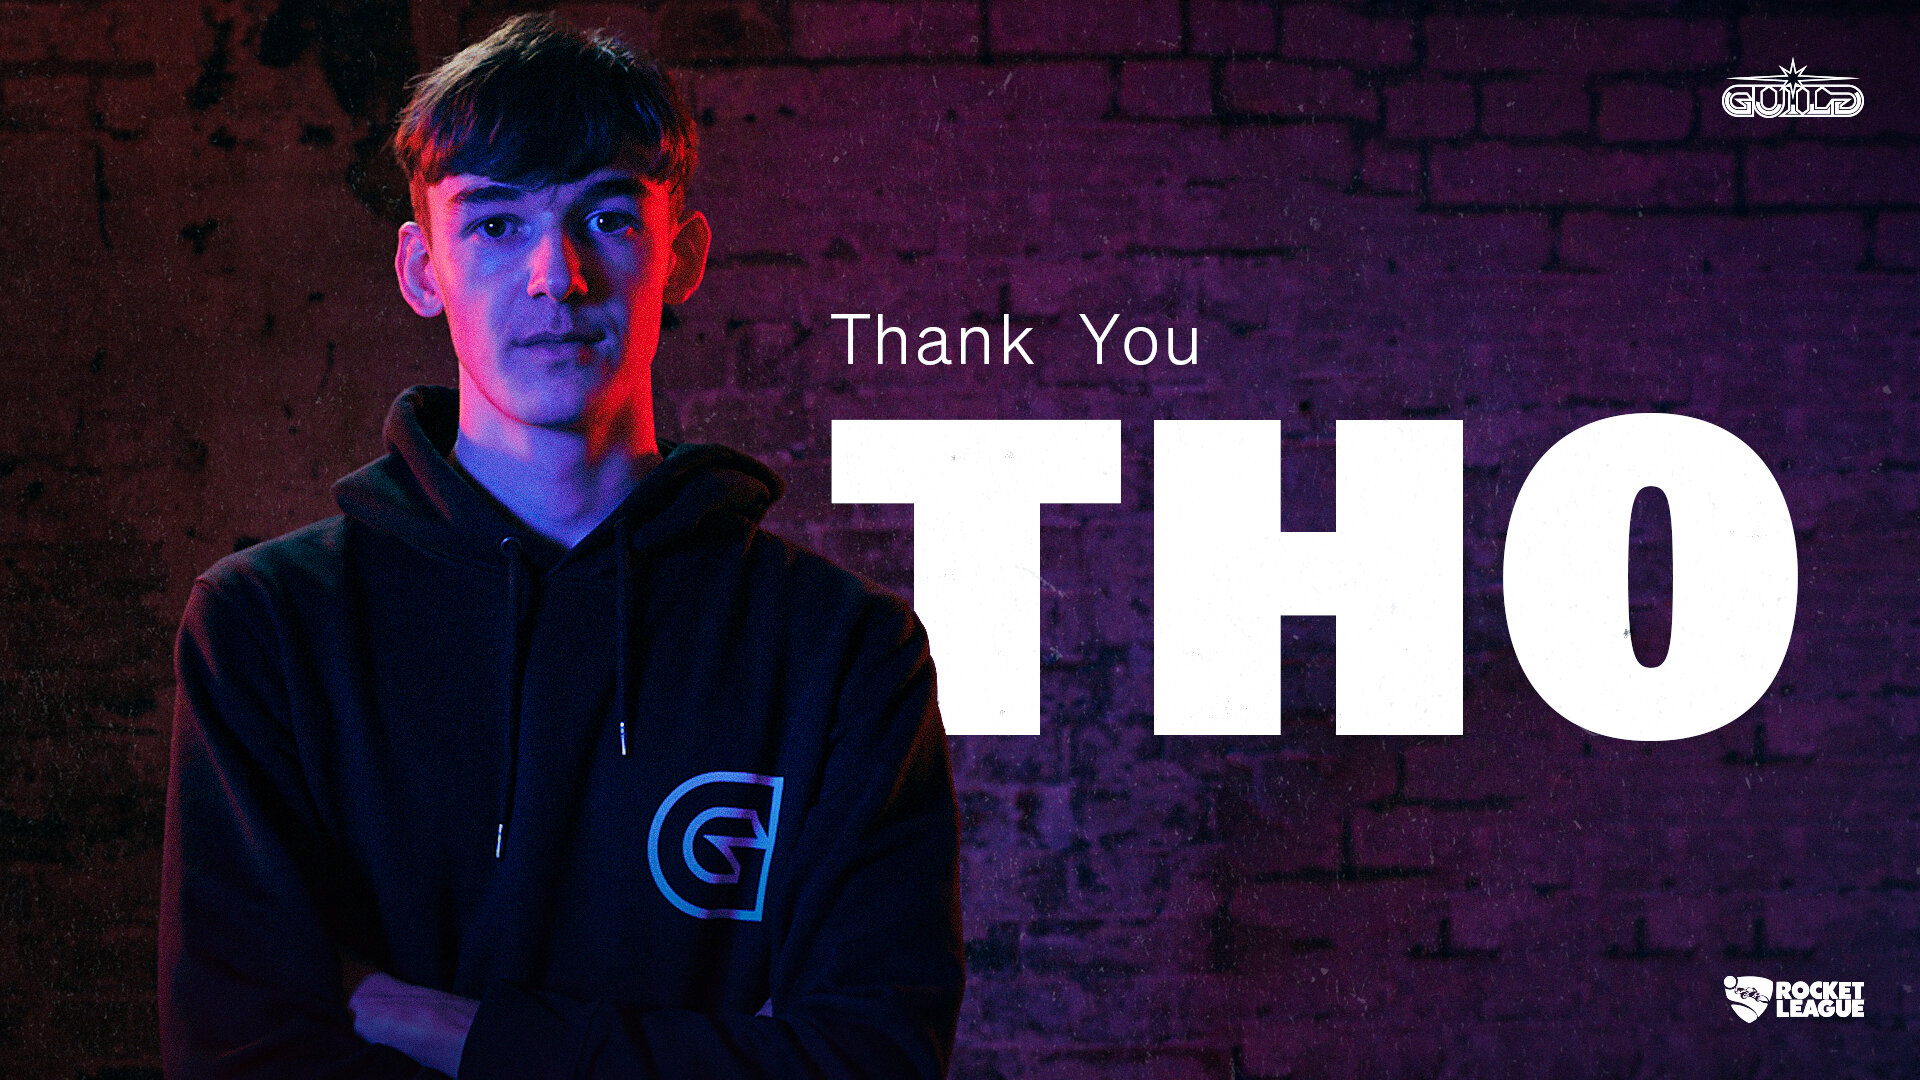 Guild Esports' thank you graphic to ThO